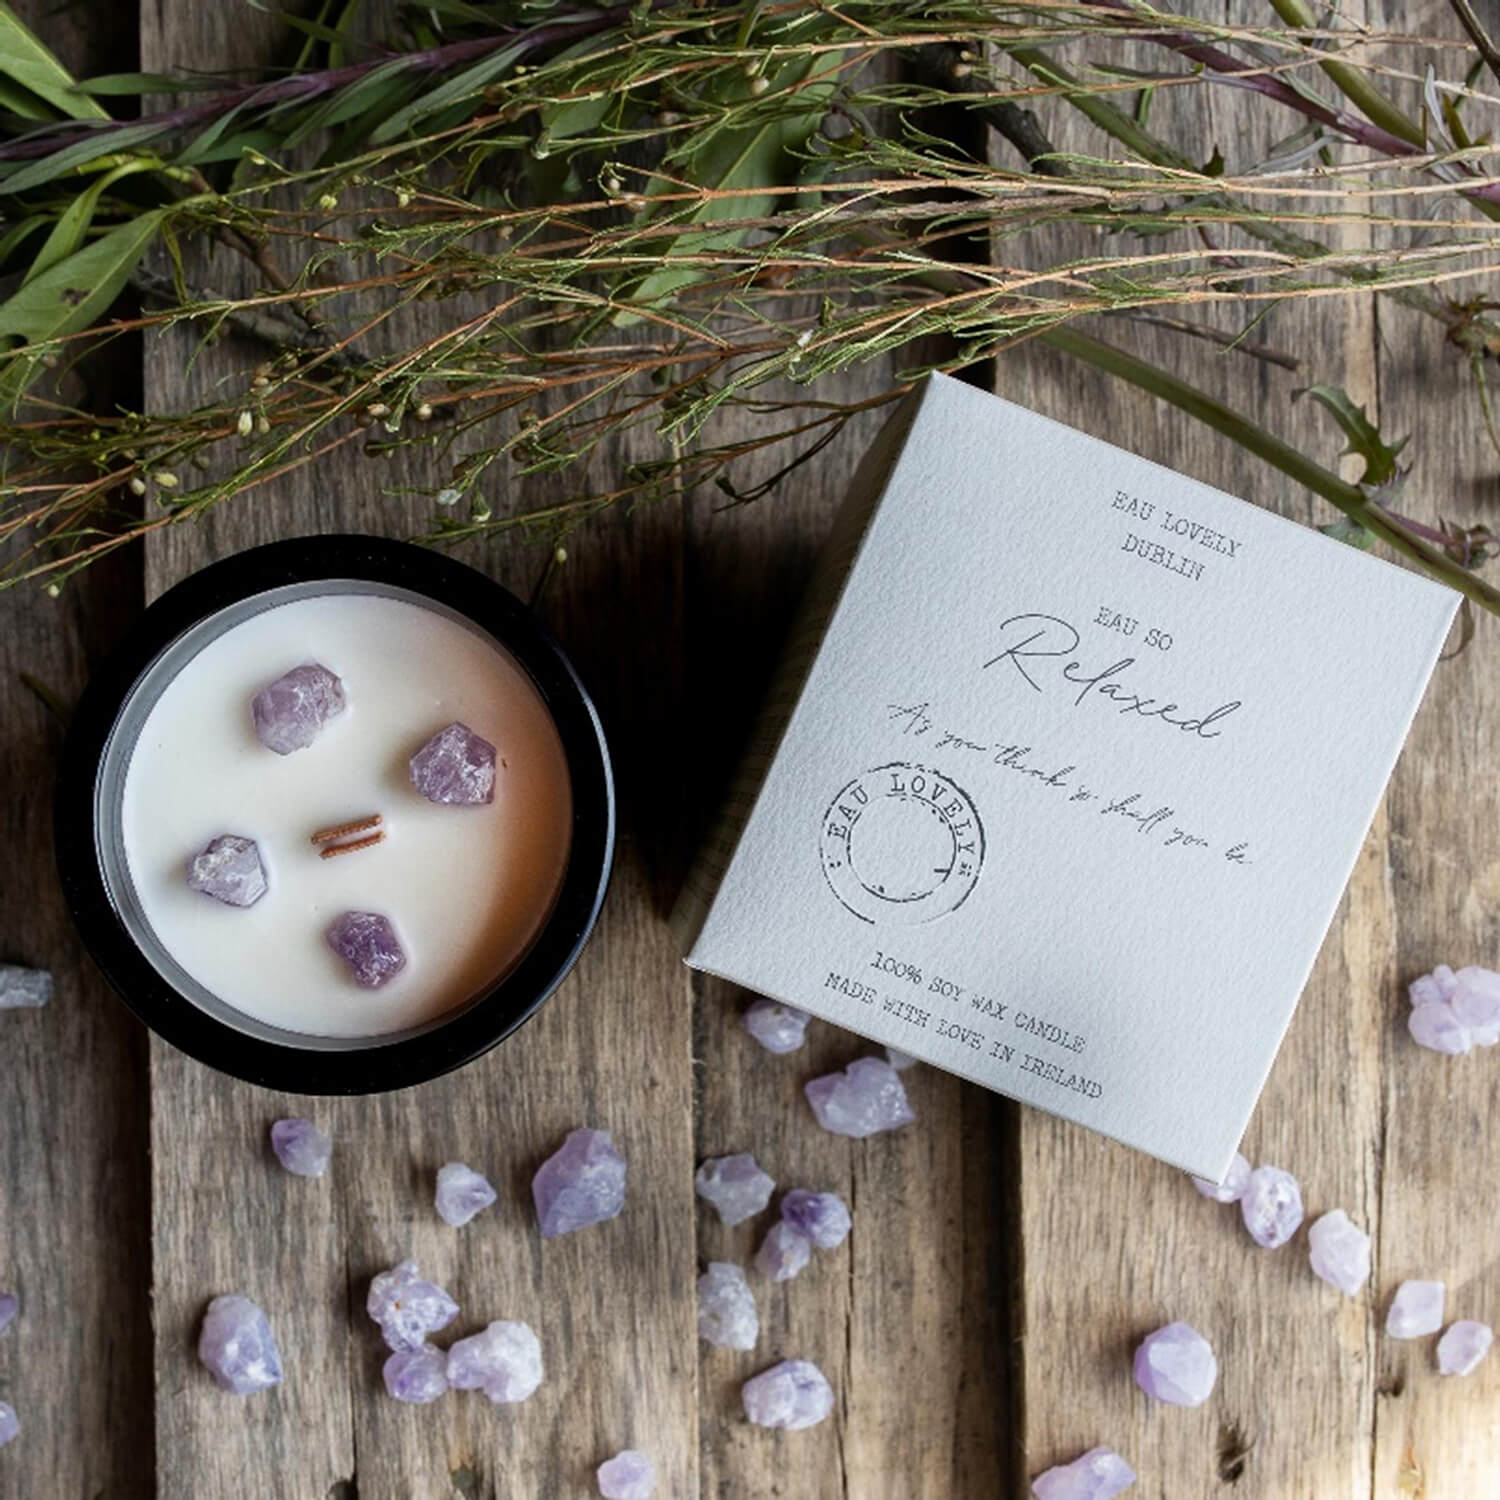 Herb Dublin Eau So Relaxed Gemstones Amethyst Candle 1 Shaws Department Stores